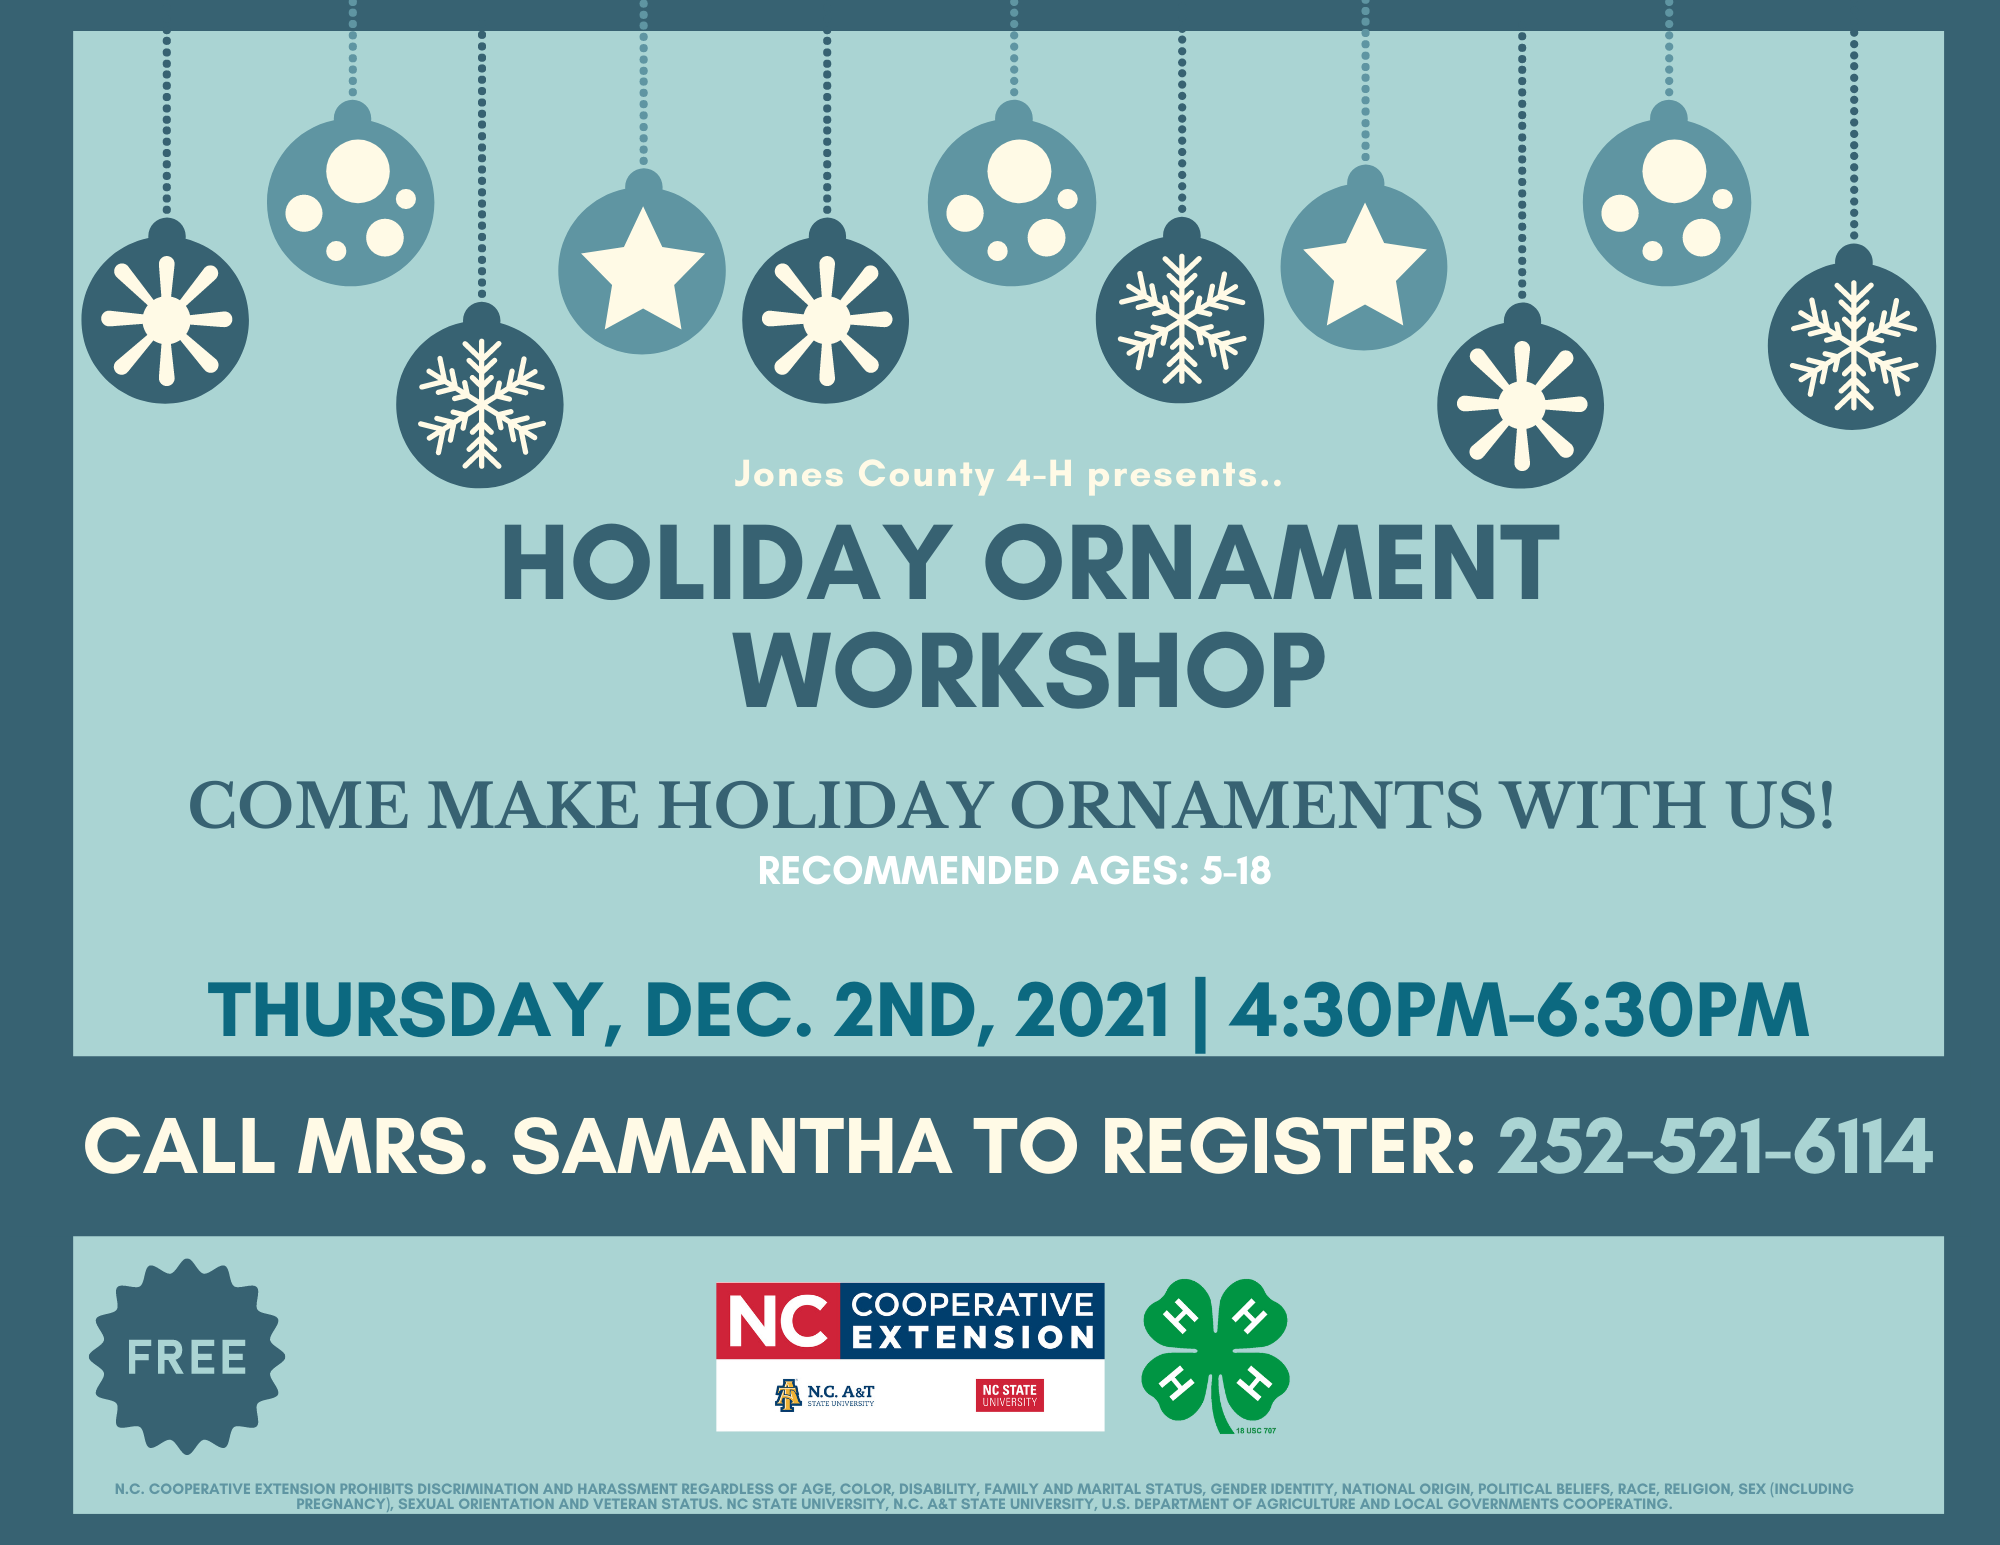 Holiday Ornament Workshop: Come Make Holiday Ornaments With Us! WHEN: This Thursday, December 2nd, 2021 | 4:30 p.m.-6:30 p.m. Recommended Ages: 5-18 Come make some cool holiday ornaments with us! 4 Ways to Register Your Youth: - Call our office at 252-448-9621, MON-FRI, 8 a.m.-5 p.m. - Call our 4-H Agent, Samantha Bennett, at 252-521-6114 - Send us a Facebook message - Email Emoni Burgess at emoni_burgess@ncsu.edu or Samantha Bennett at sjwiggin@ncsu.edu